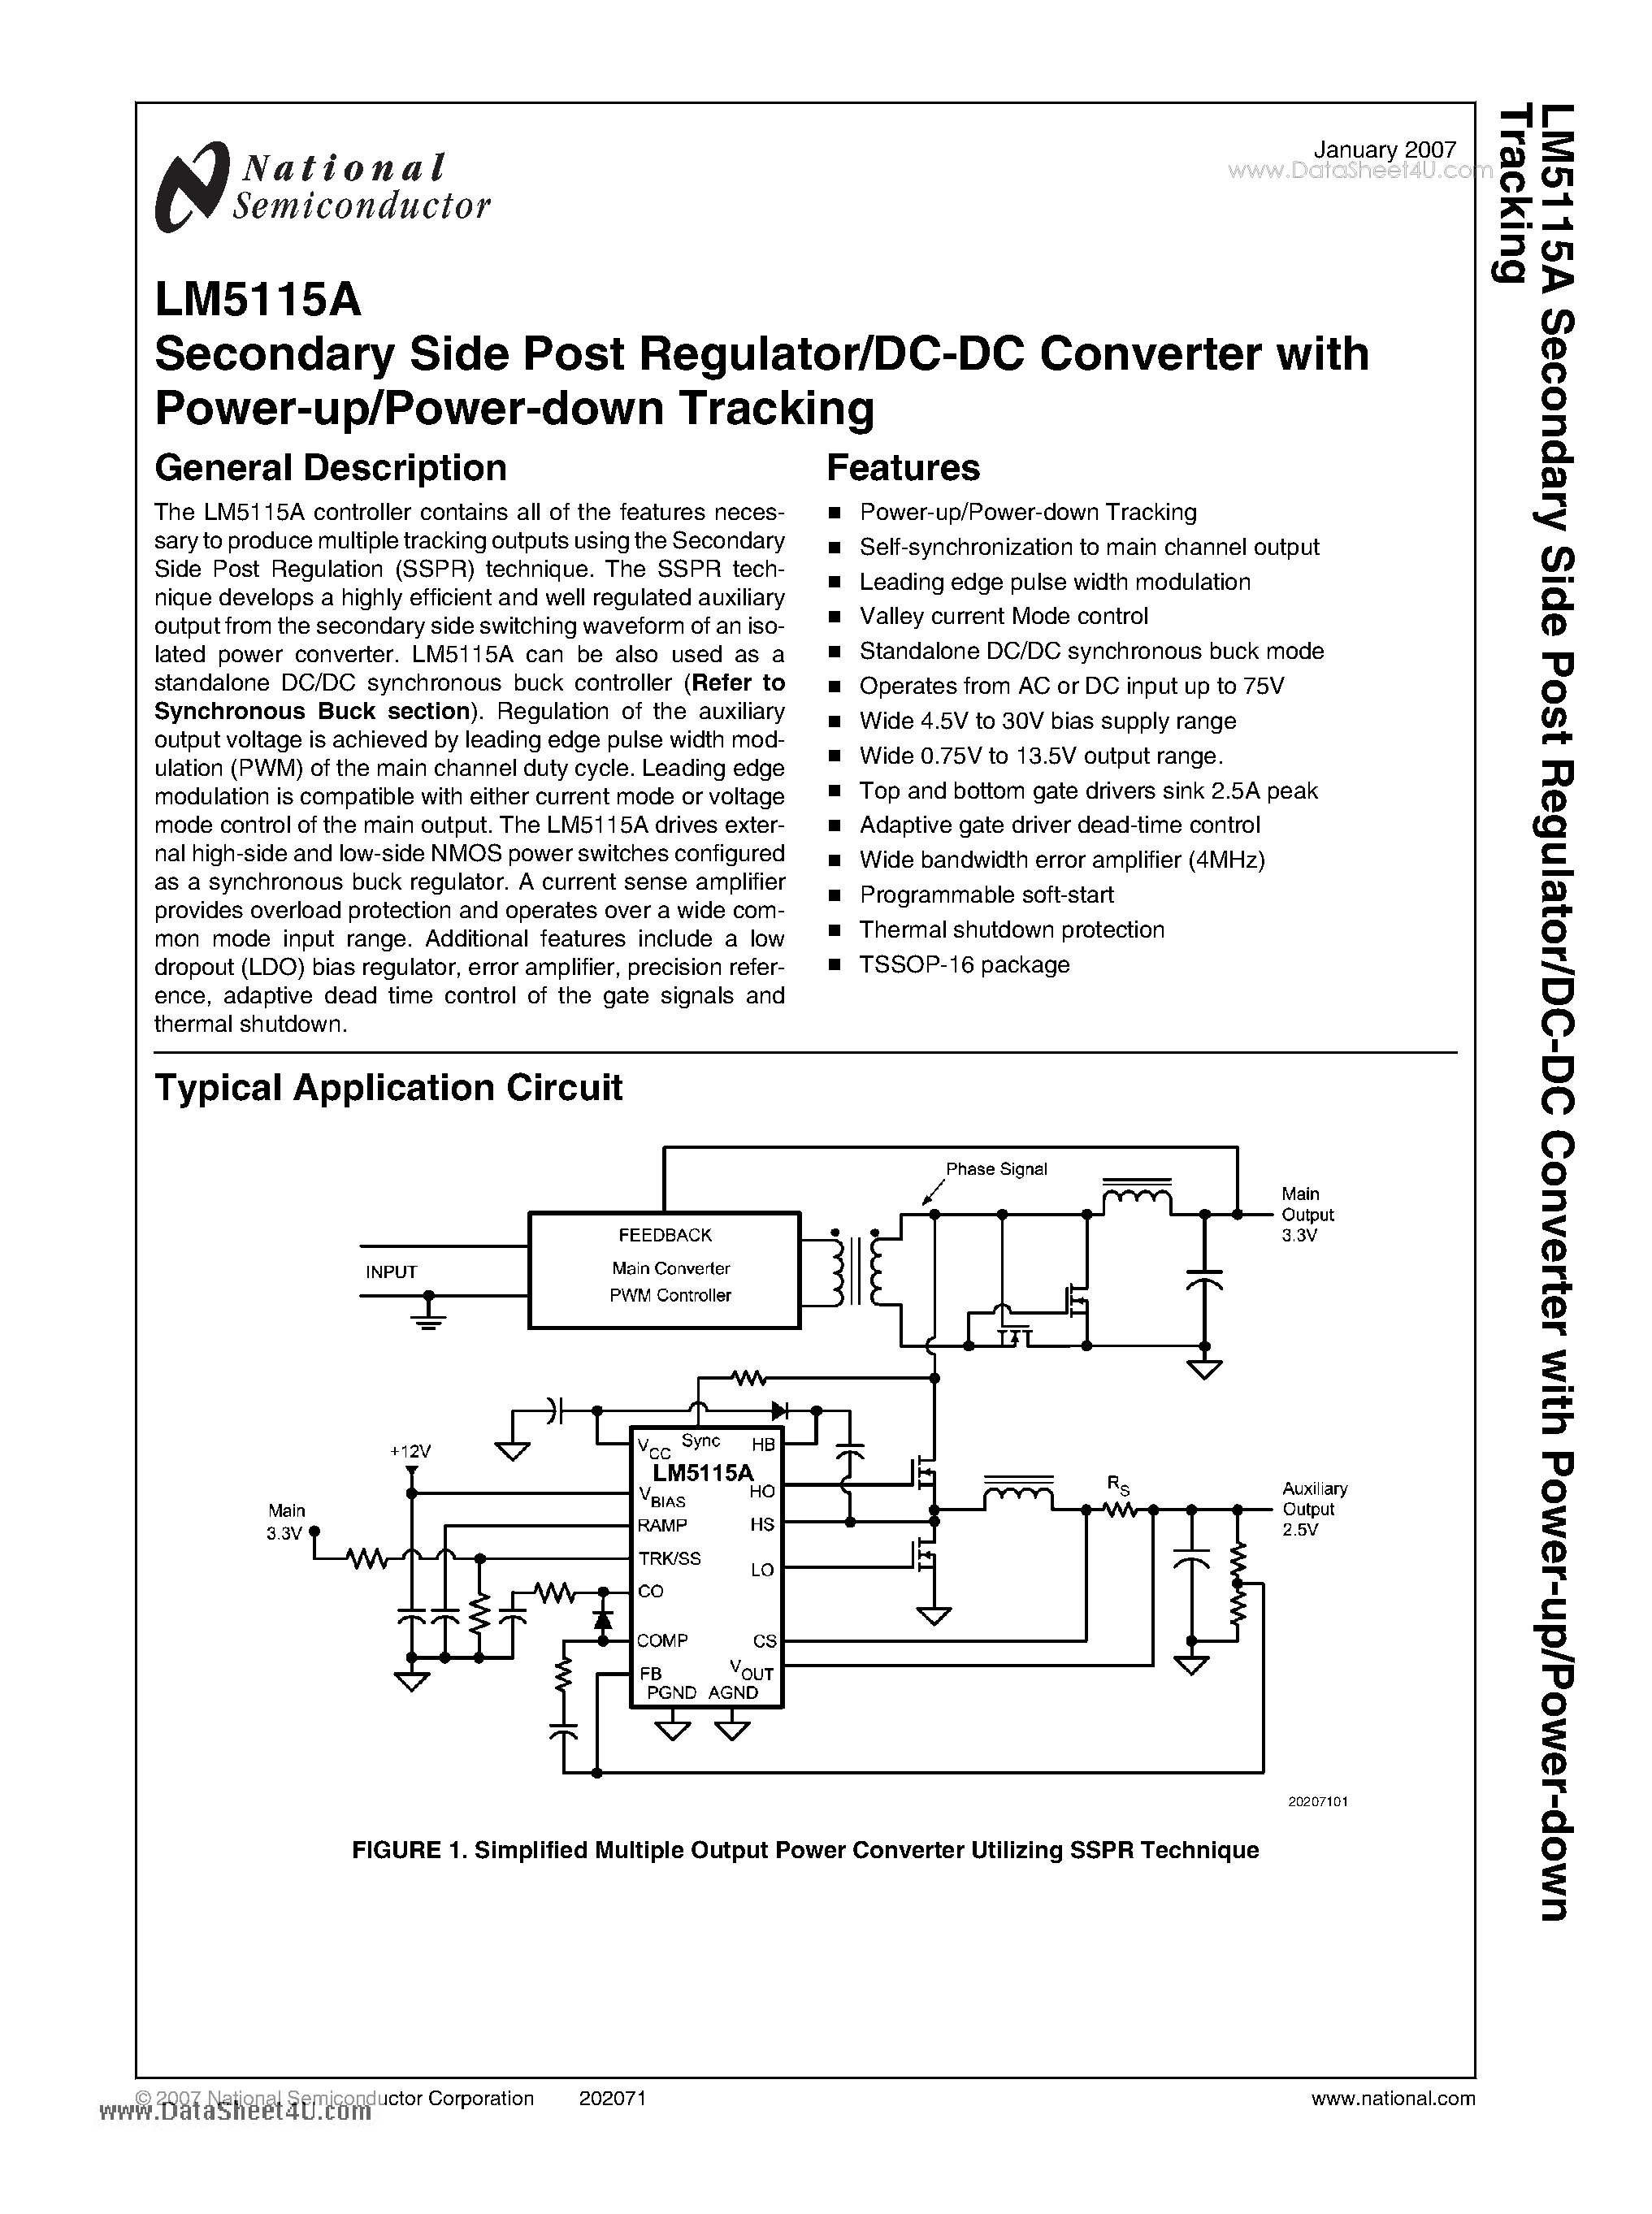 Datasheet LM5115A - Secondary Side Post Regulator/DC-DC Converter with Power-up/Power-down Tracking page 1